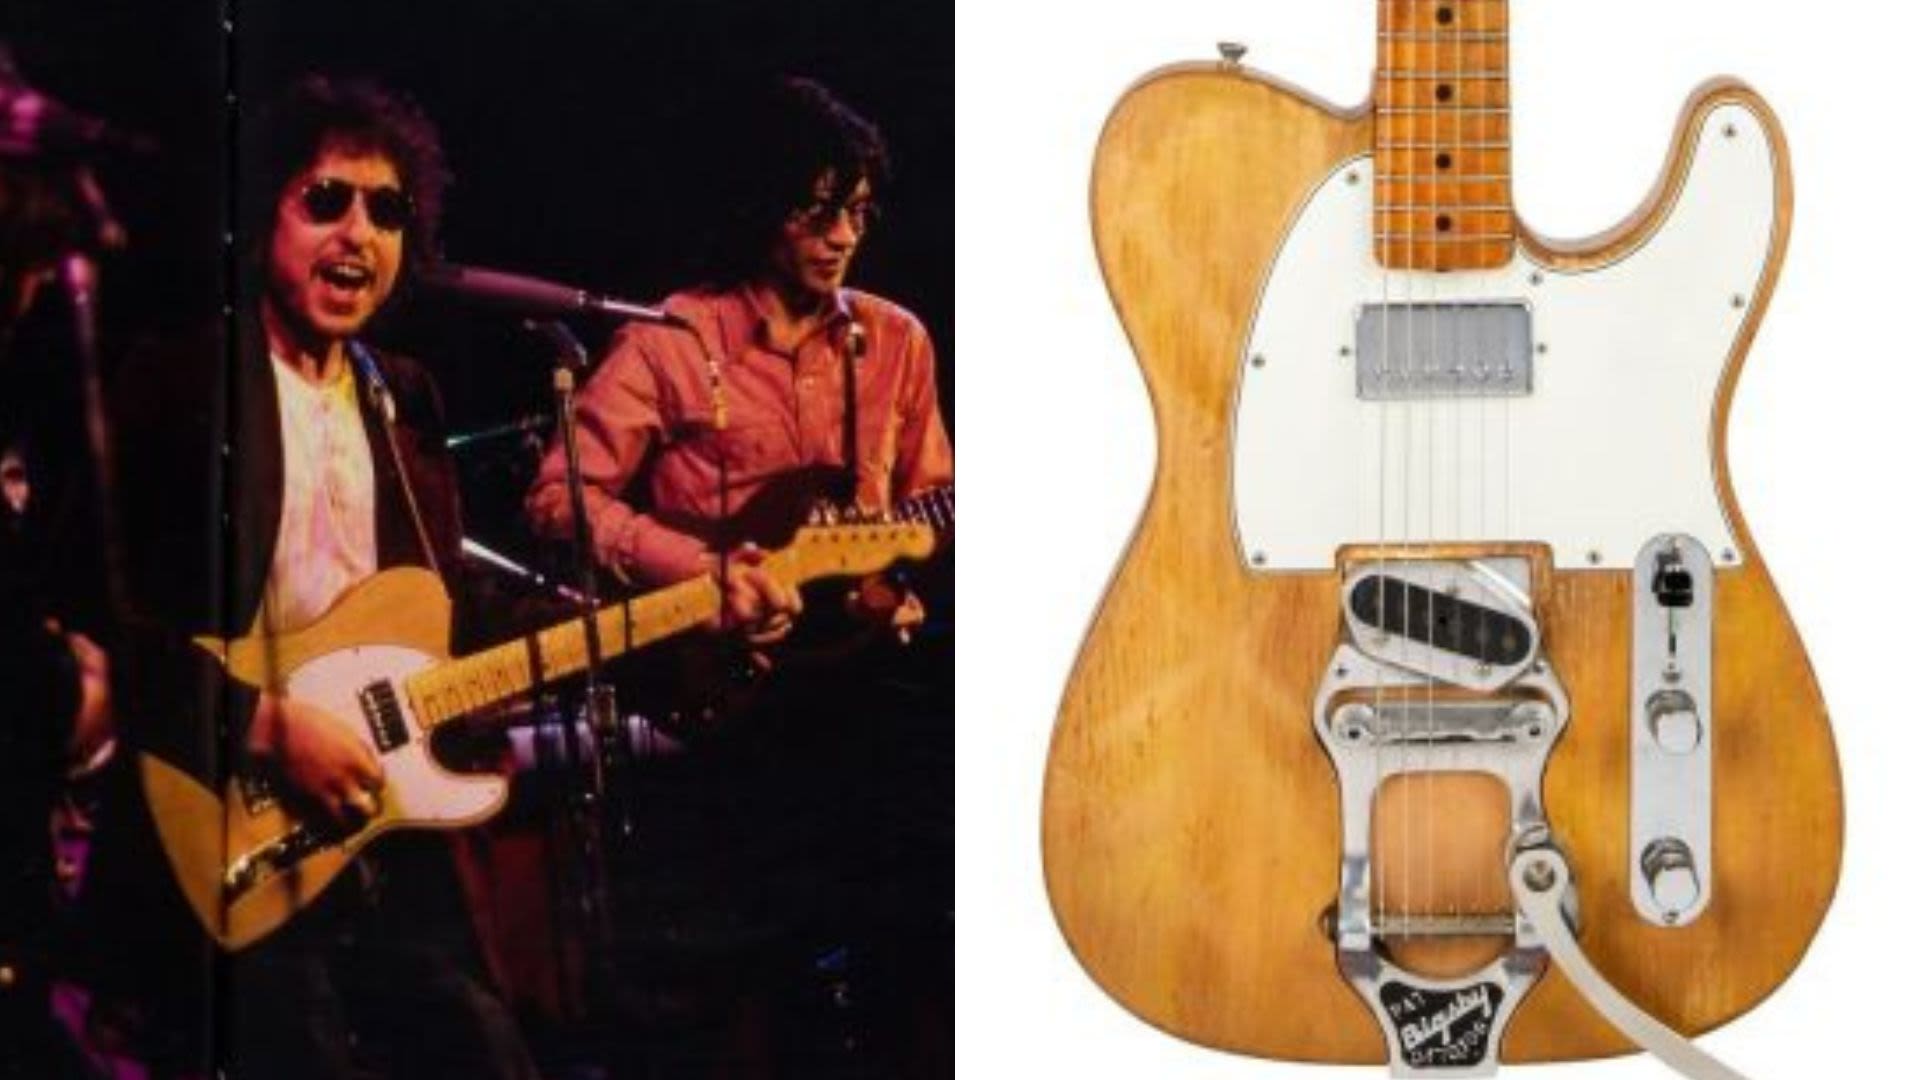 Bob Dylan and Robbie Robertson's 1965 Telecaster is up for auction and could fetch up to $700,000